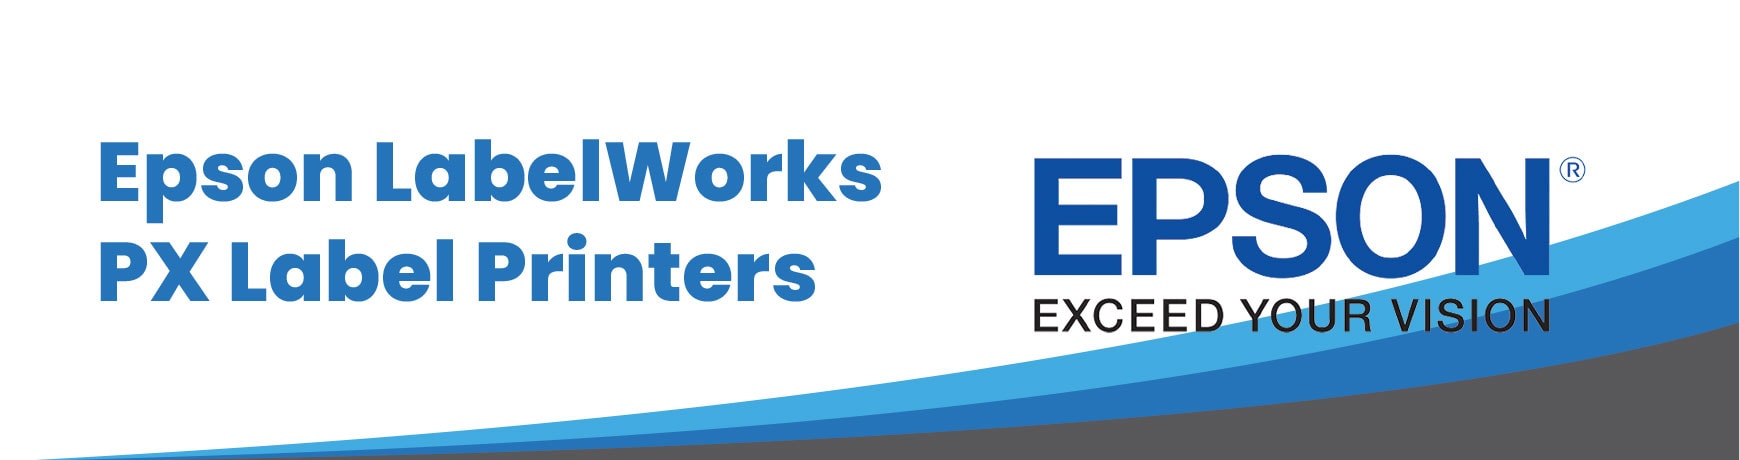 Epson LabelWorks PX Label Printers